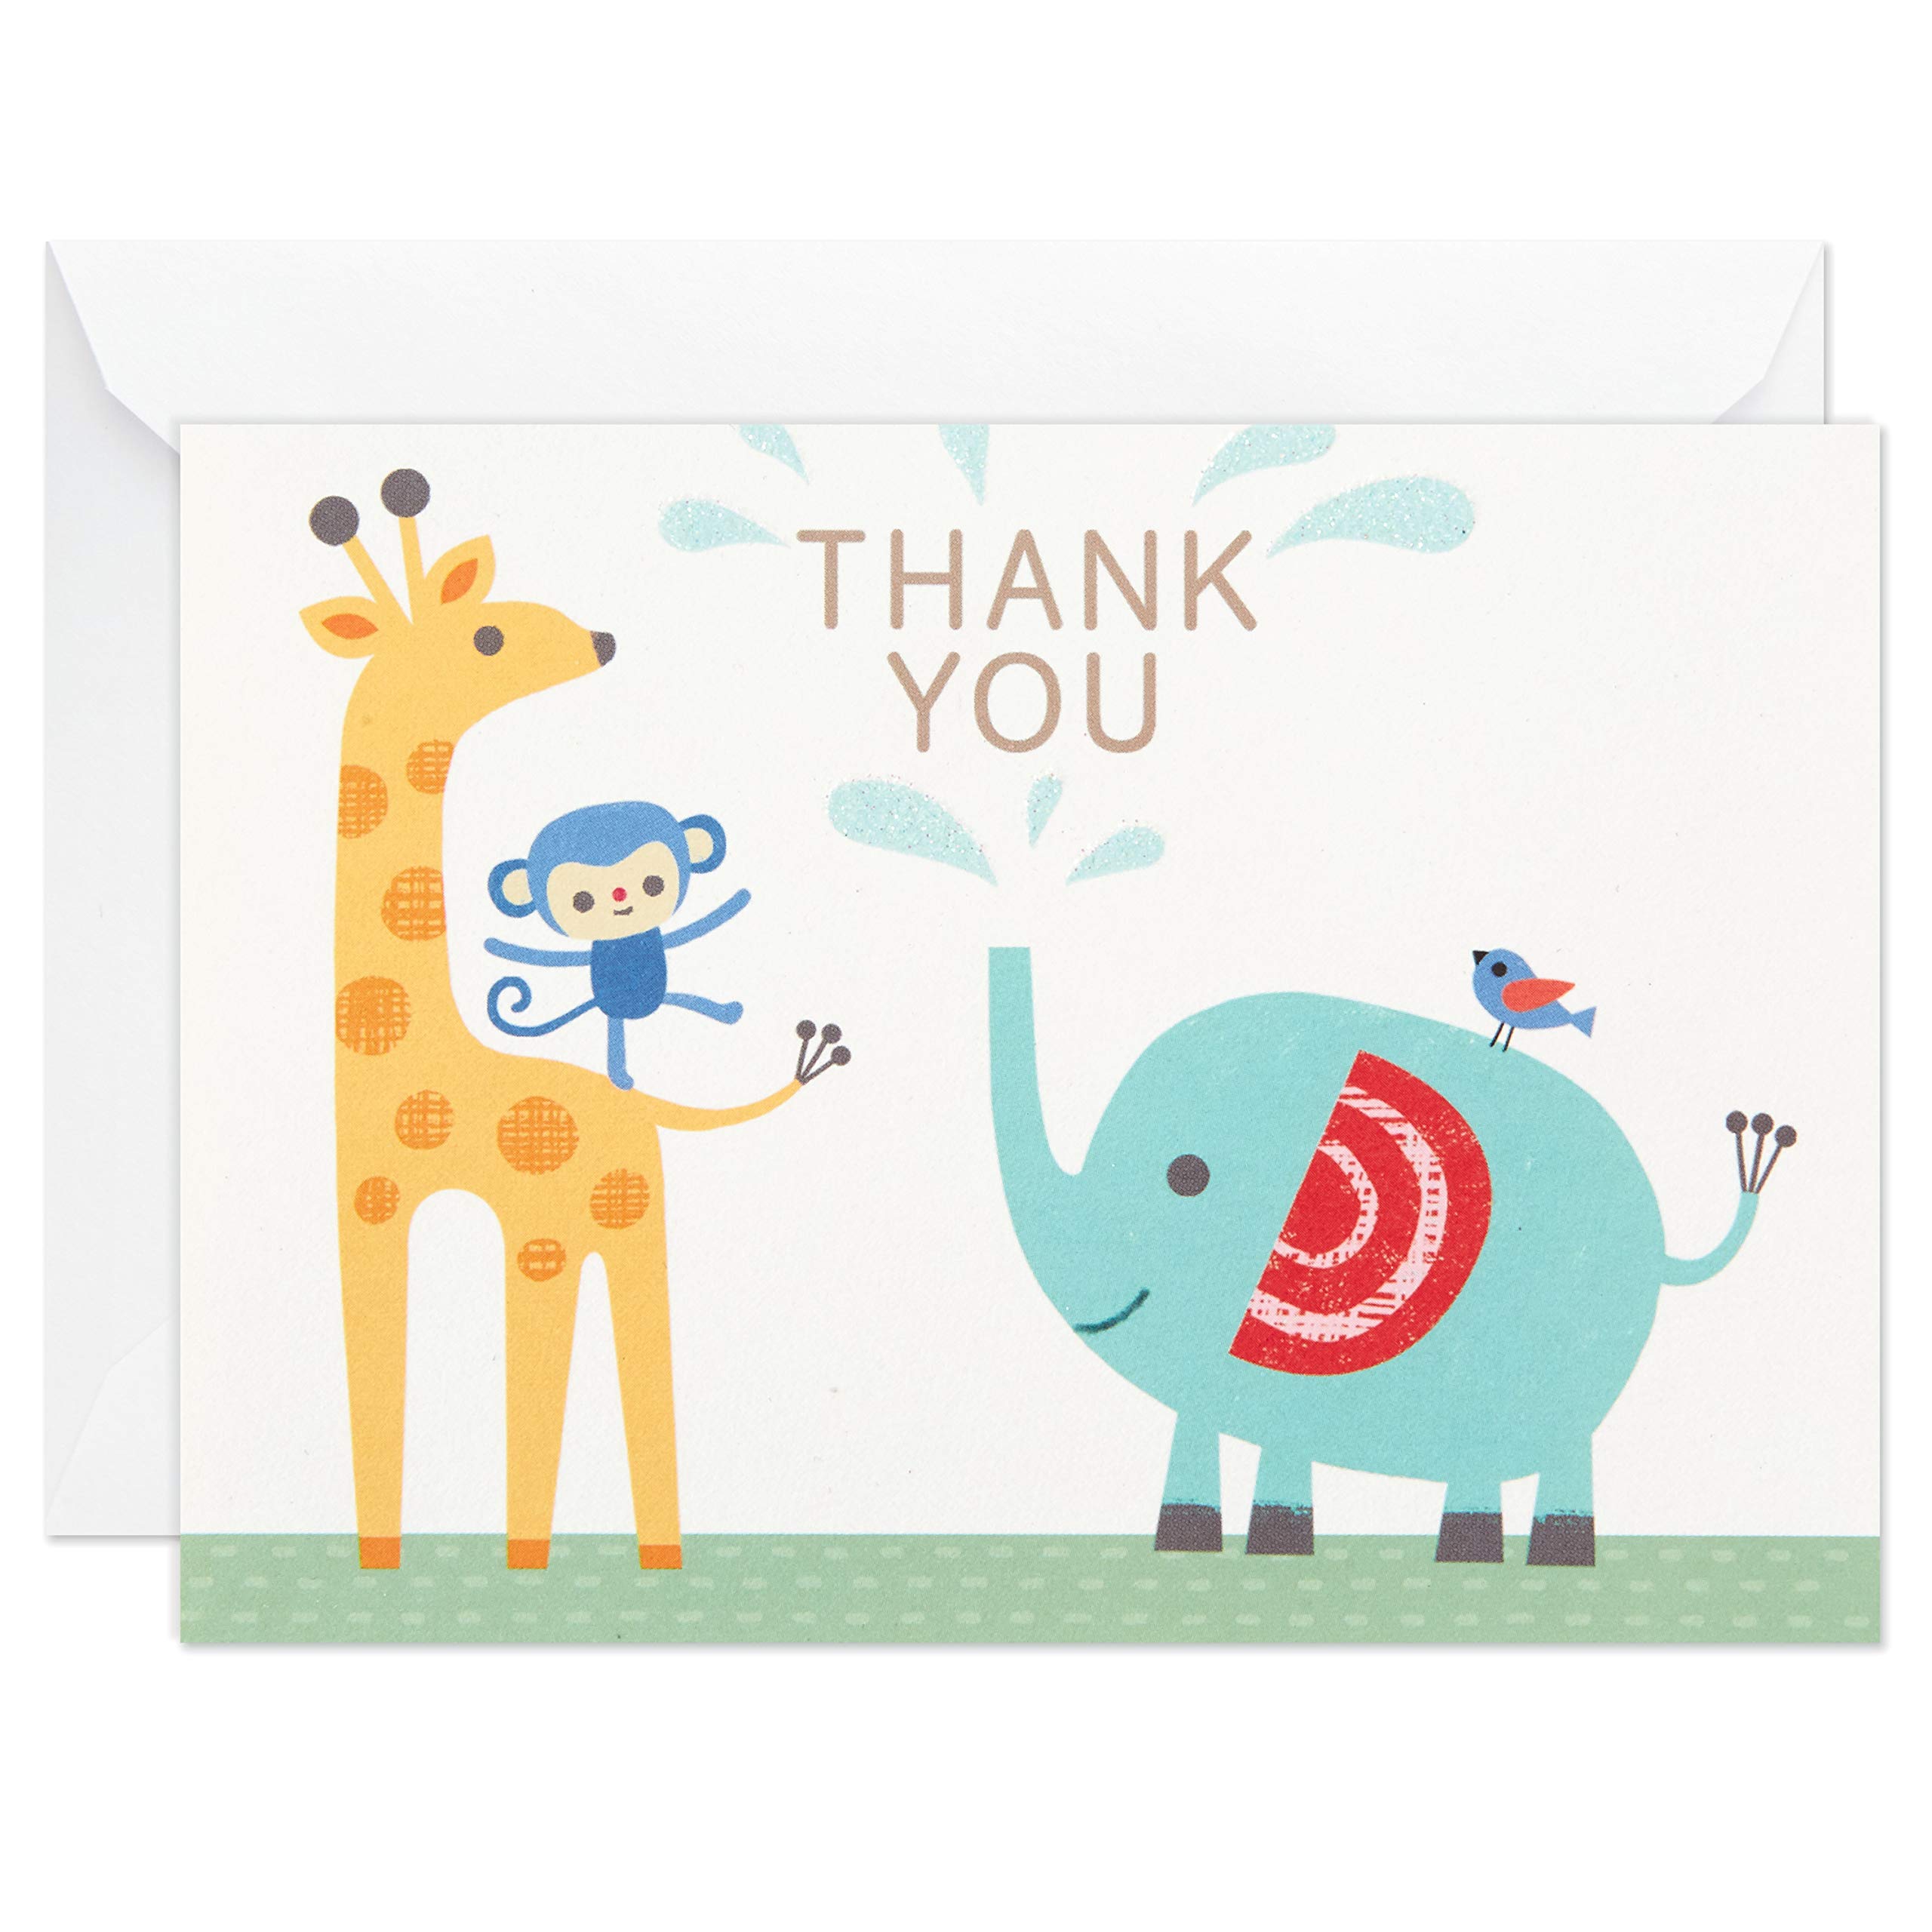 Hallmark Baby Shower Thank You Cards Assortment, Zoo Animals (50 Cards with Envelopes for Baby Boy or Baby Girl) Elephant, Giraffe, Monkey